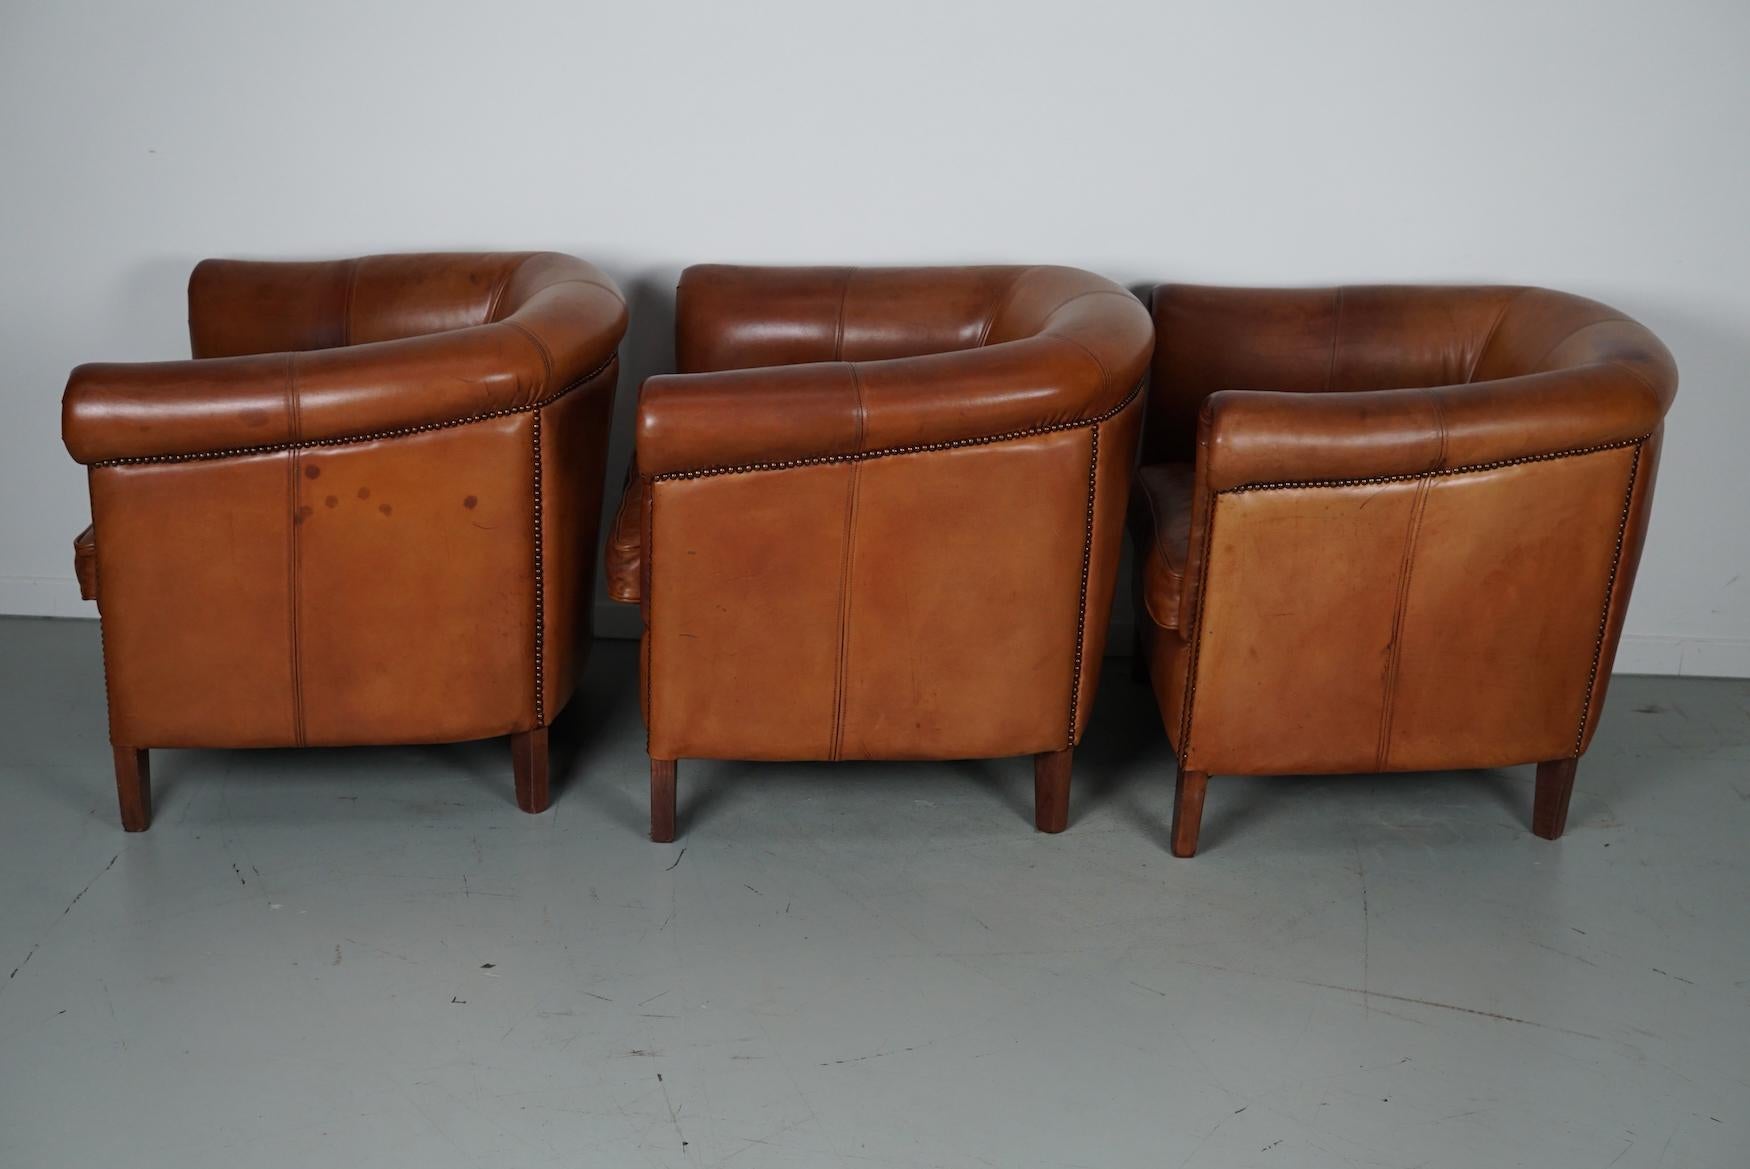  Vintage Dutch Cognac Leather Club Chairs, Set of Three with Two Footstools For Sale 9